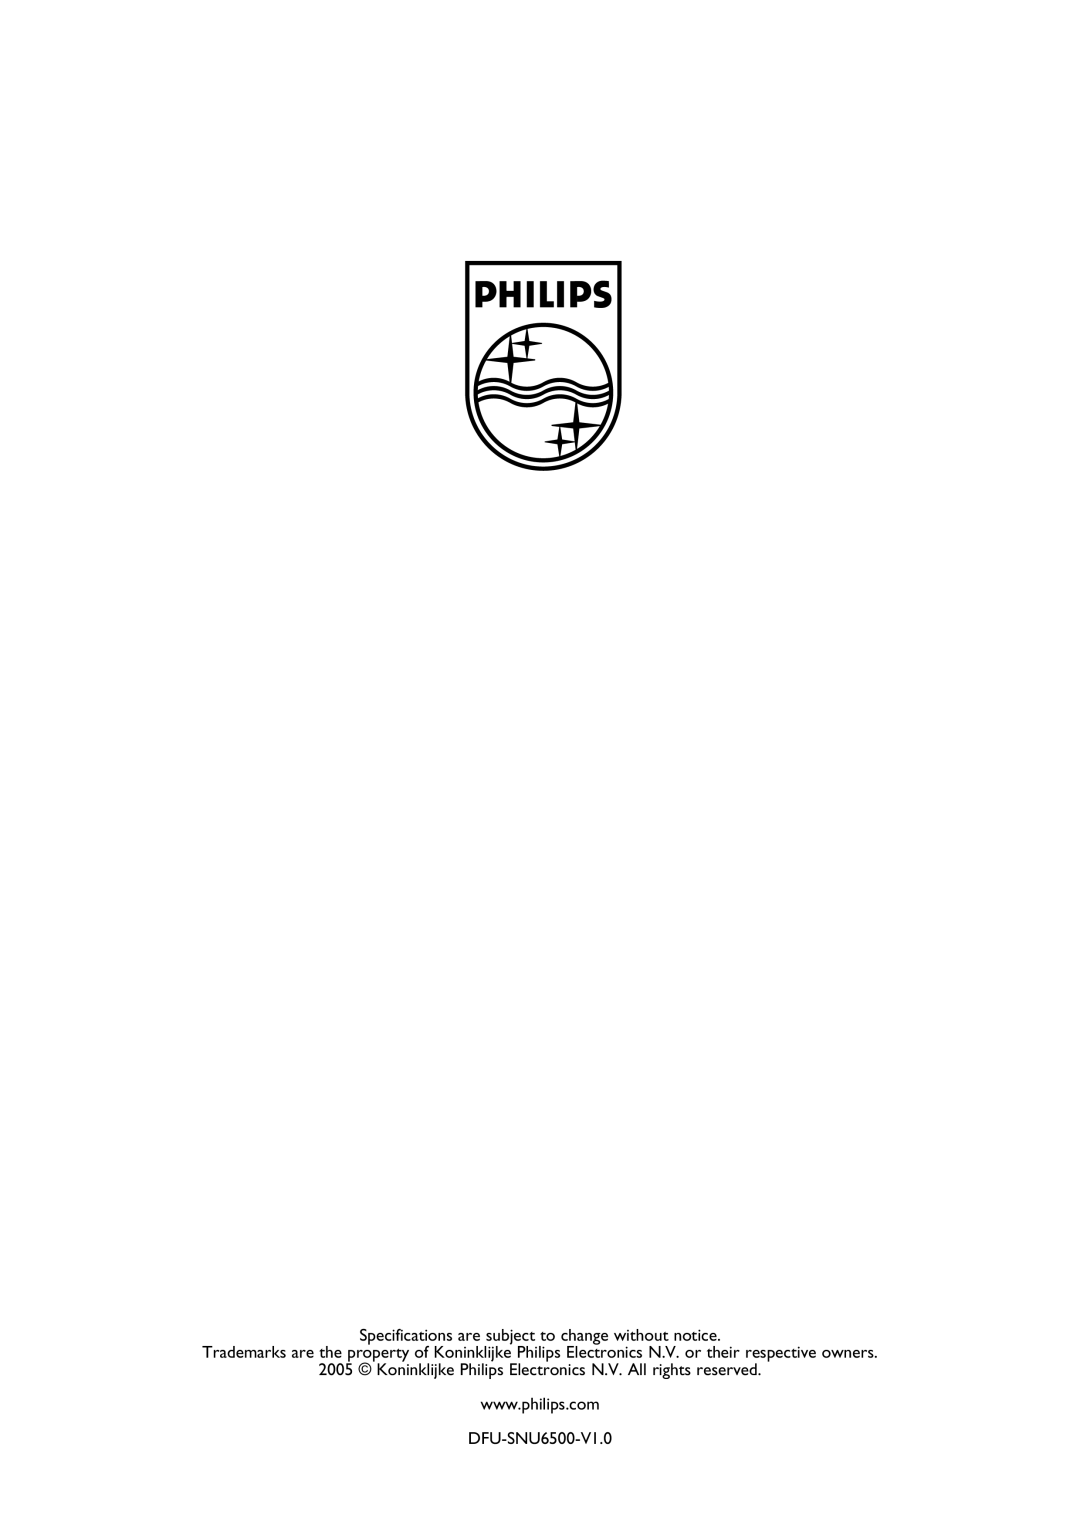 Philips manual Specifications are subject to change without notice, DFU-SNU6500-V1.0 